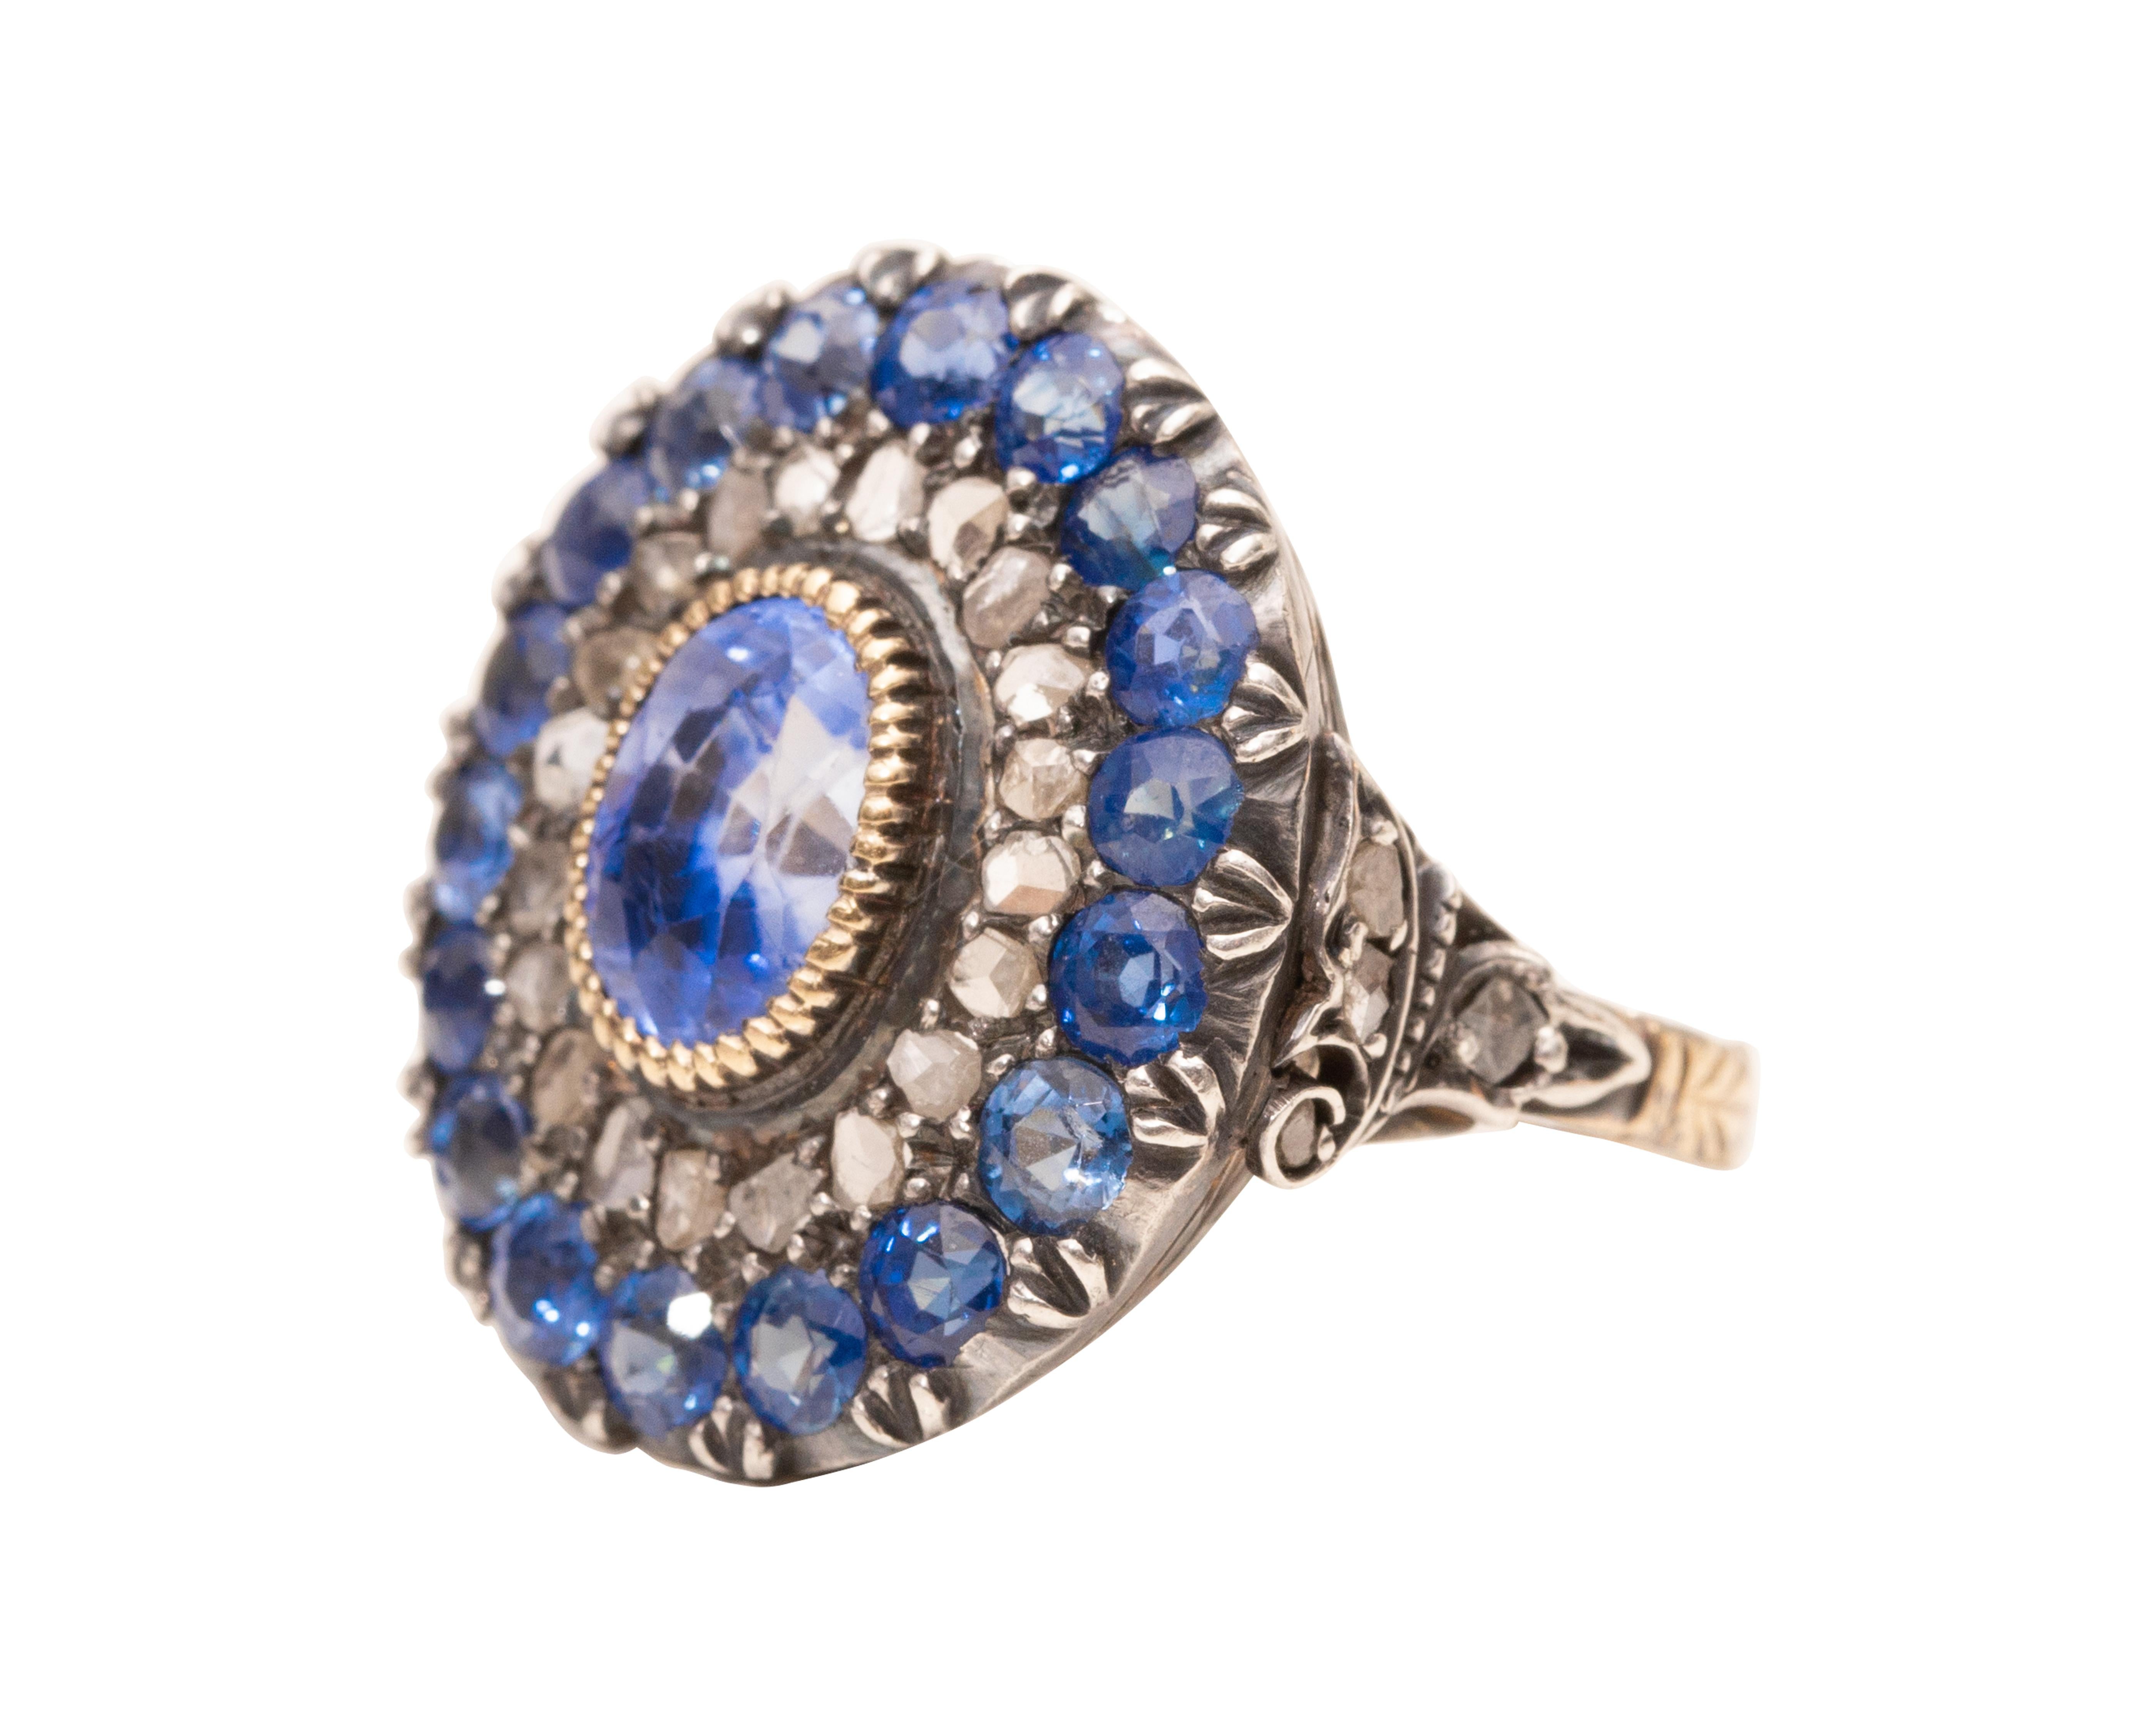 This stunning example of an early Victorian era sapphire ring is one of the best we've ever seen! The stunning 2.5 carat deep cornflower blue sapphire steals the show surrounded by a halo of  antique polki cut diamonds and even more sapphires!